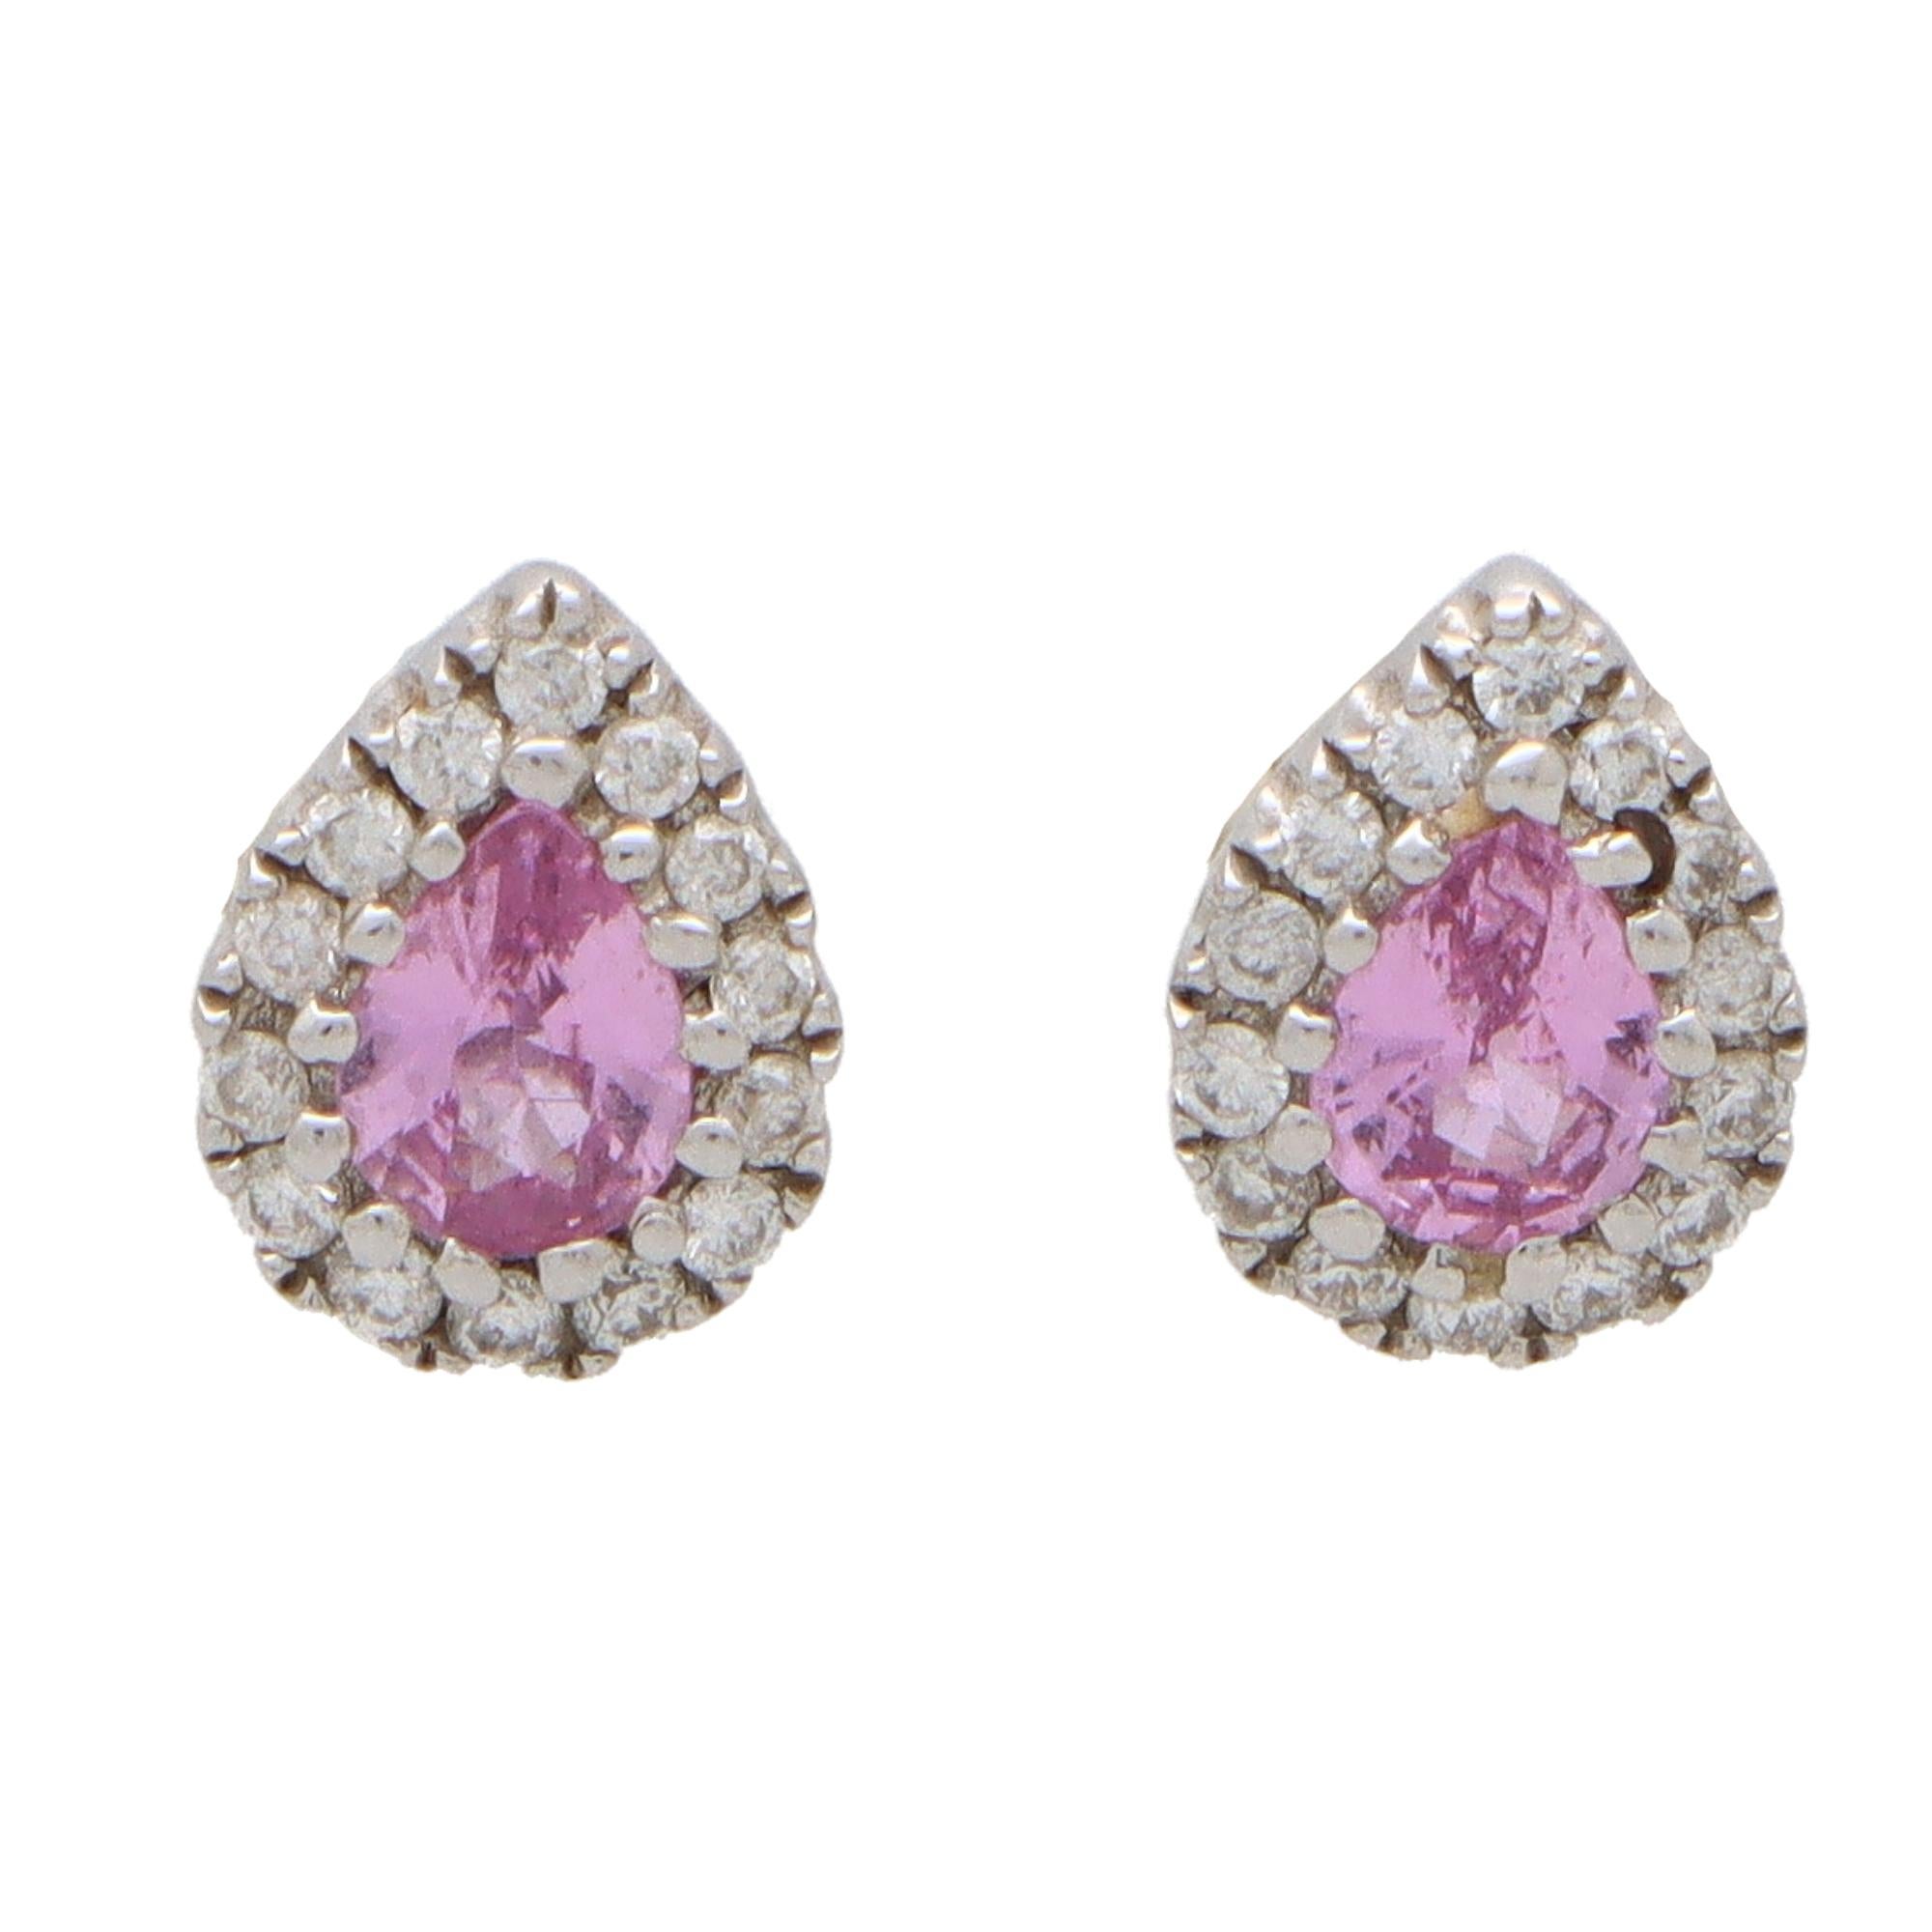 Vintage Pear Shaped Pastel Pink Sapphire and Diamond Earrings Set in 18k Gold 1